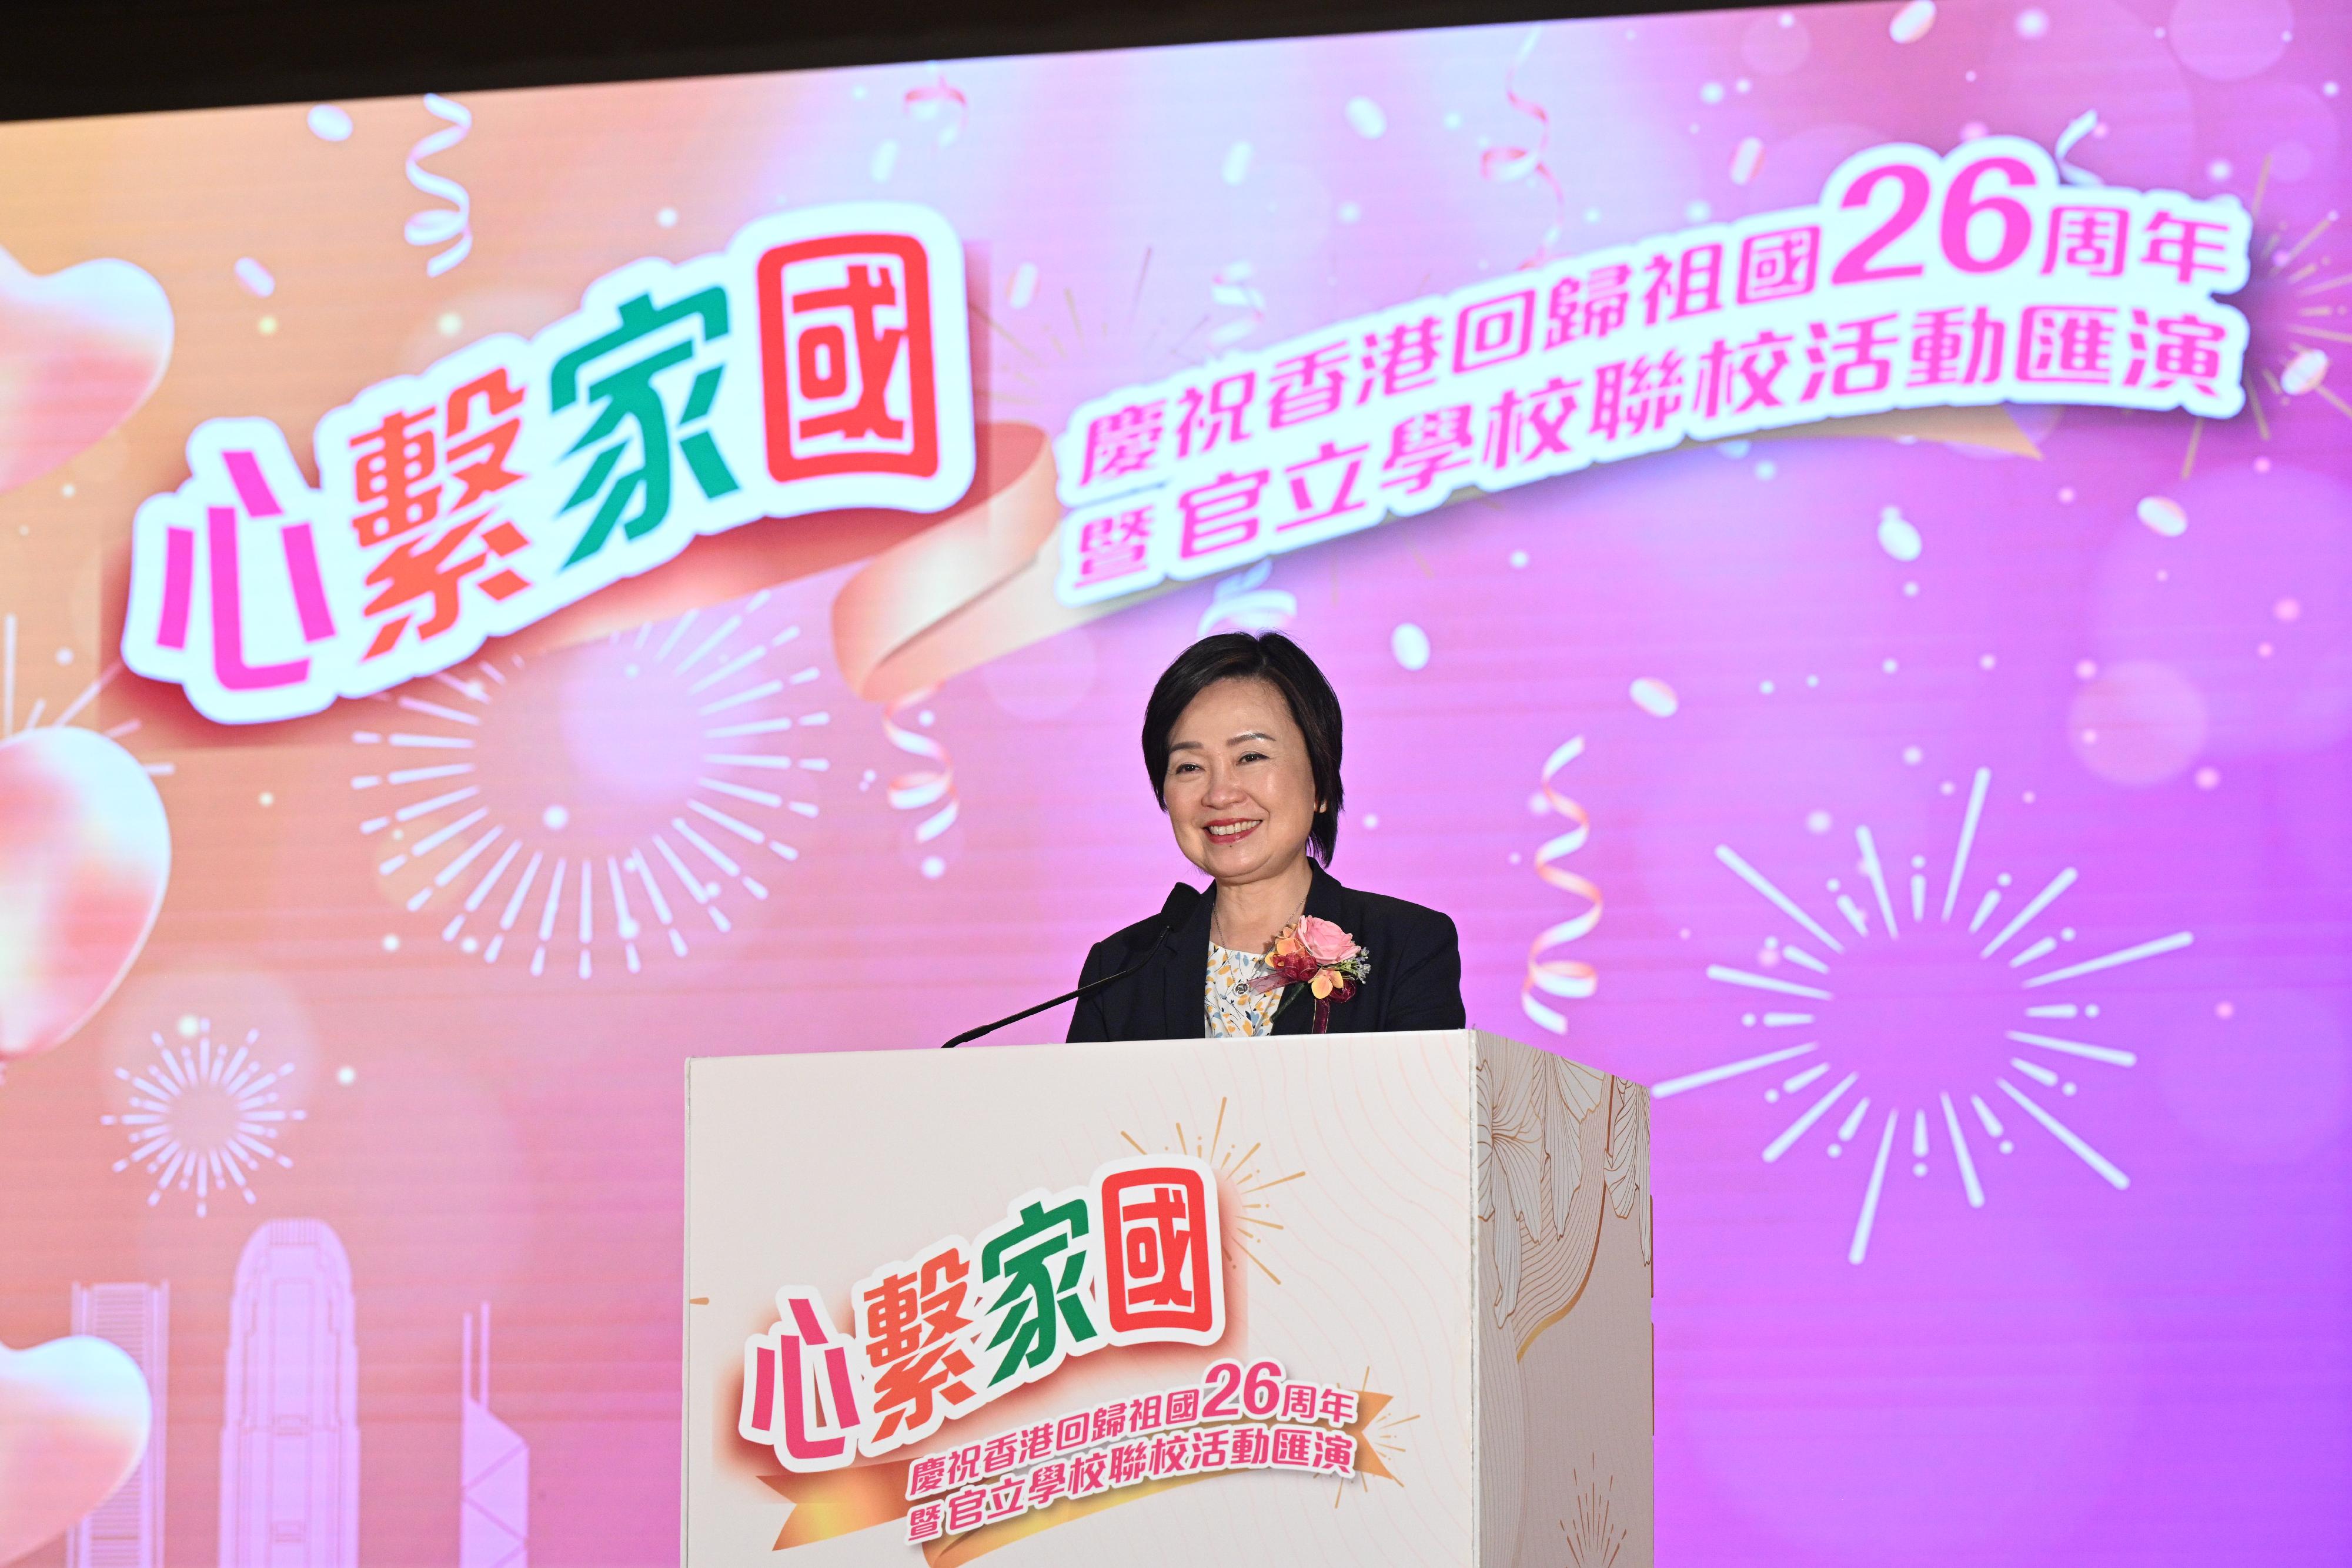 The Education Bureau today (June 30) held the "Love Our Home, Treasure Our Country" Celebration of 26th Anniversary of Hong Kong's Return to the Motherland cum Government Schools Joint School Activities Gala. Photo shows the Secretary for Education, Dr Choi Yuk-lin, speaking at the Gala.